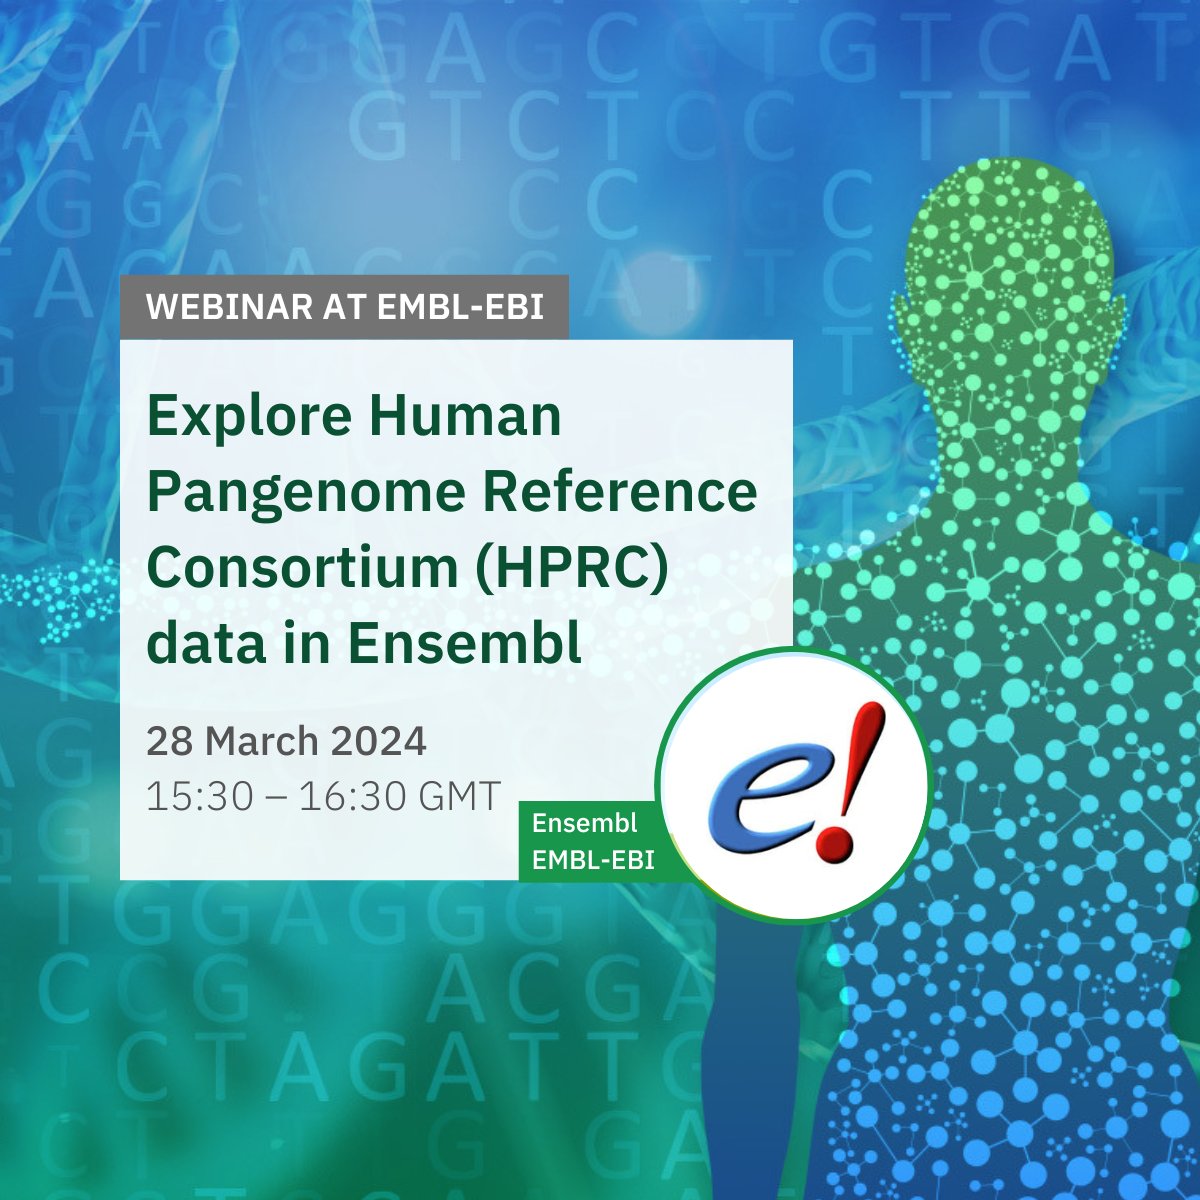 📢 One more week to go until our upcoming @emblebi #webinar where we will be exploring @HumanPangenome Reference Consortium (#HPRC) data in #Ensembl 👩🏼‍🦱🧑🏾‍🦳🧑🏻‍🦱 Registration is free but essential 👉🏽 ebi.ac.uk/training/event…